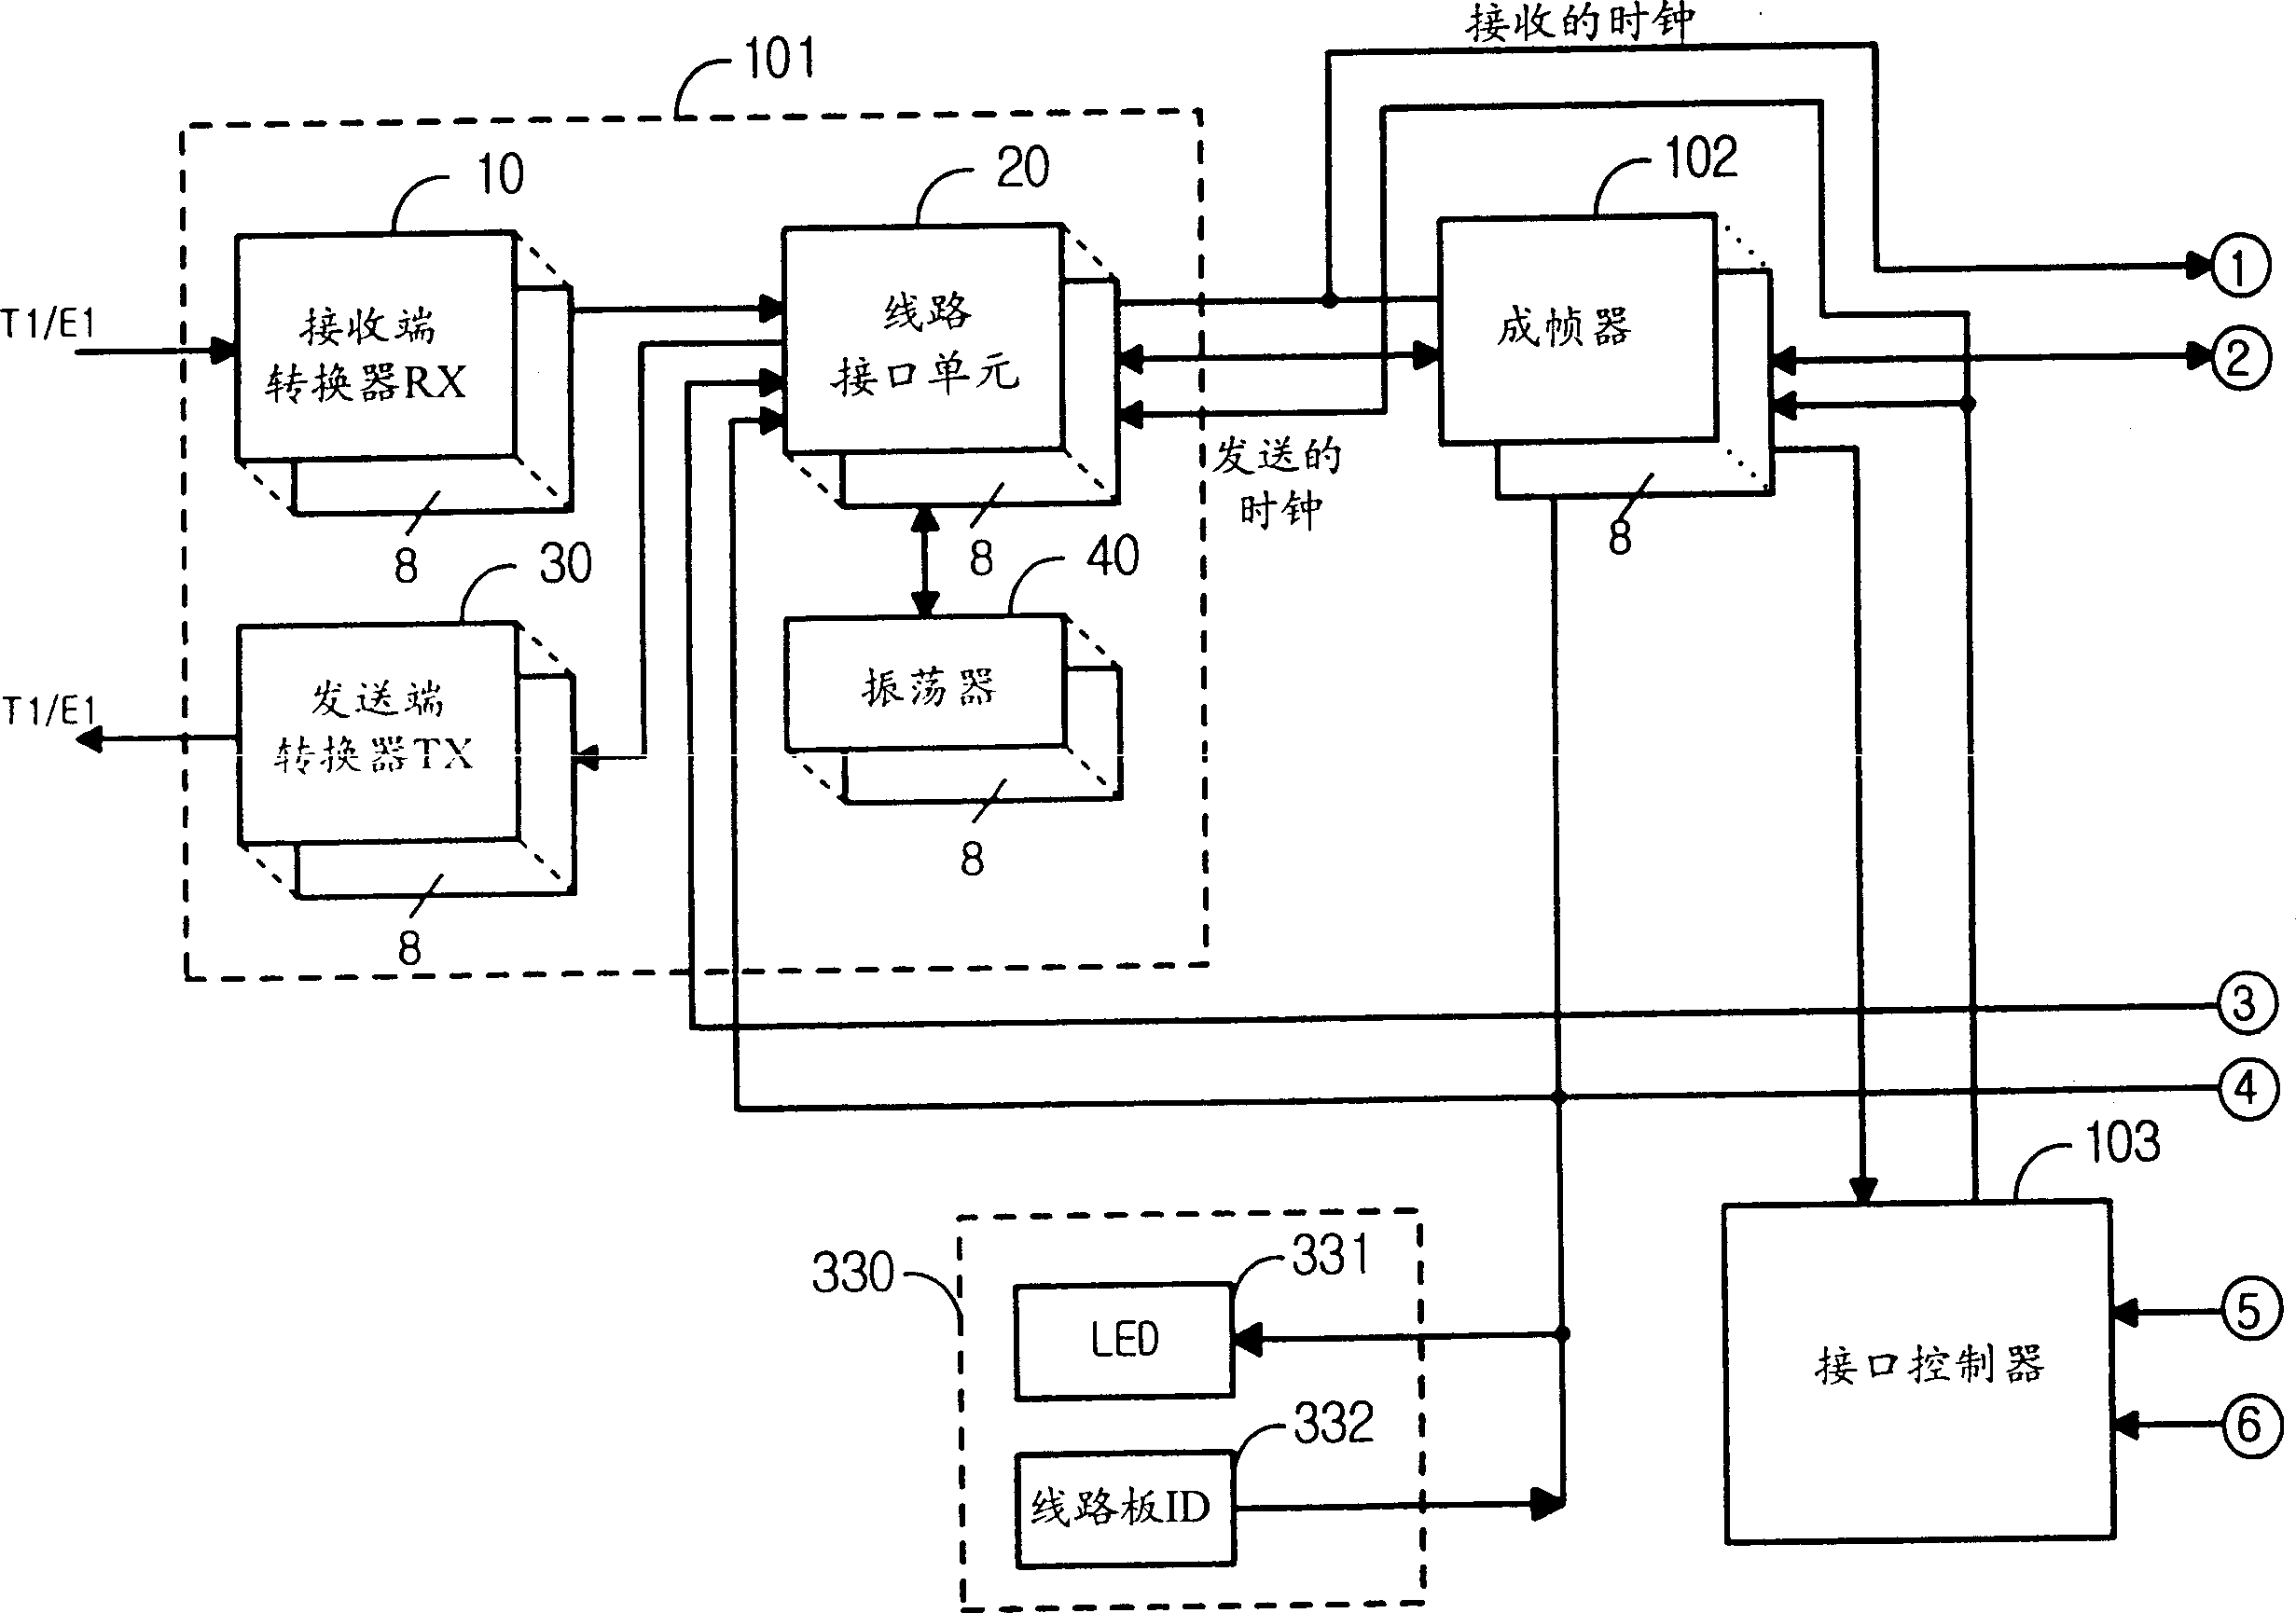 Apparatus for interfacing PDH network and ATM network